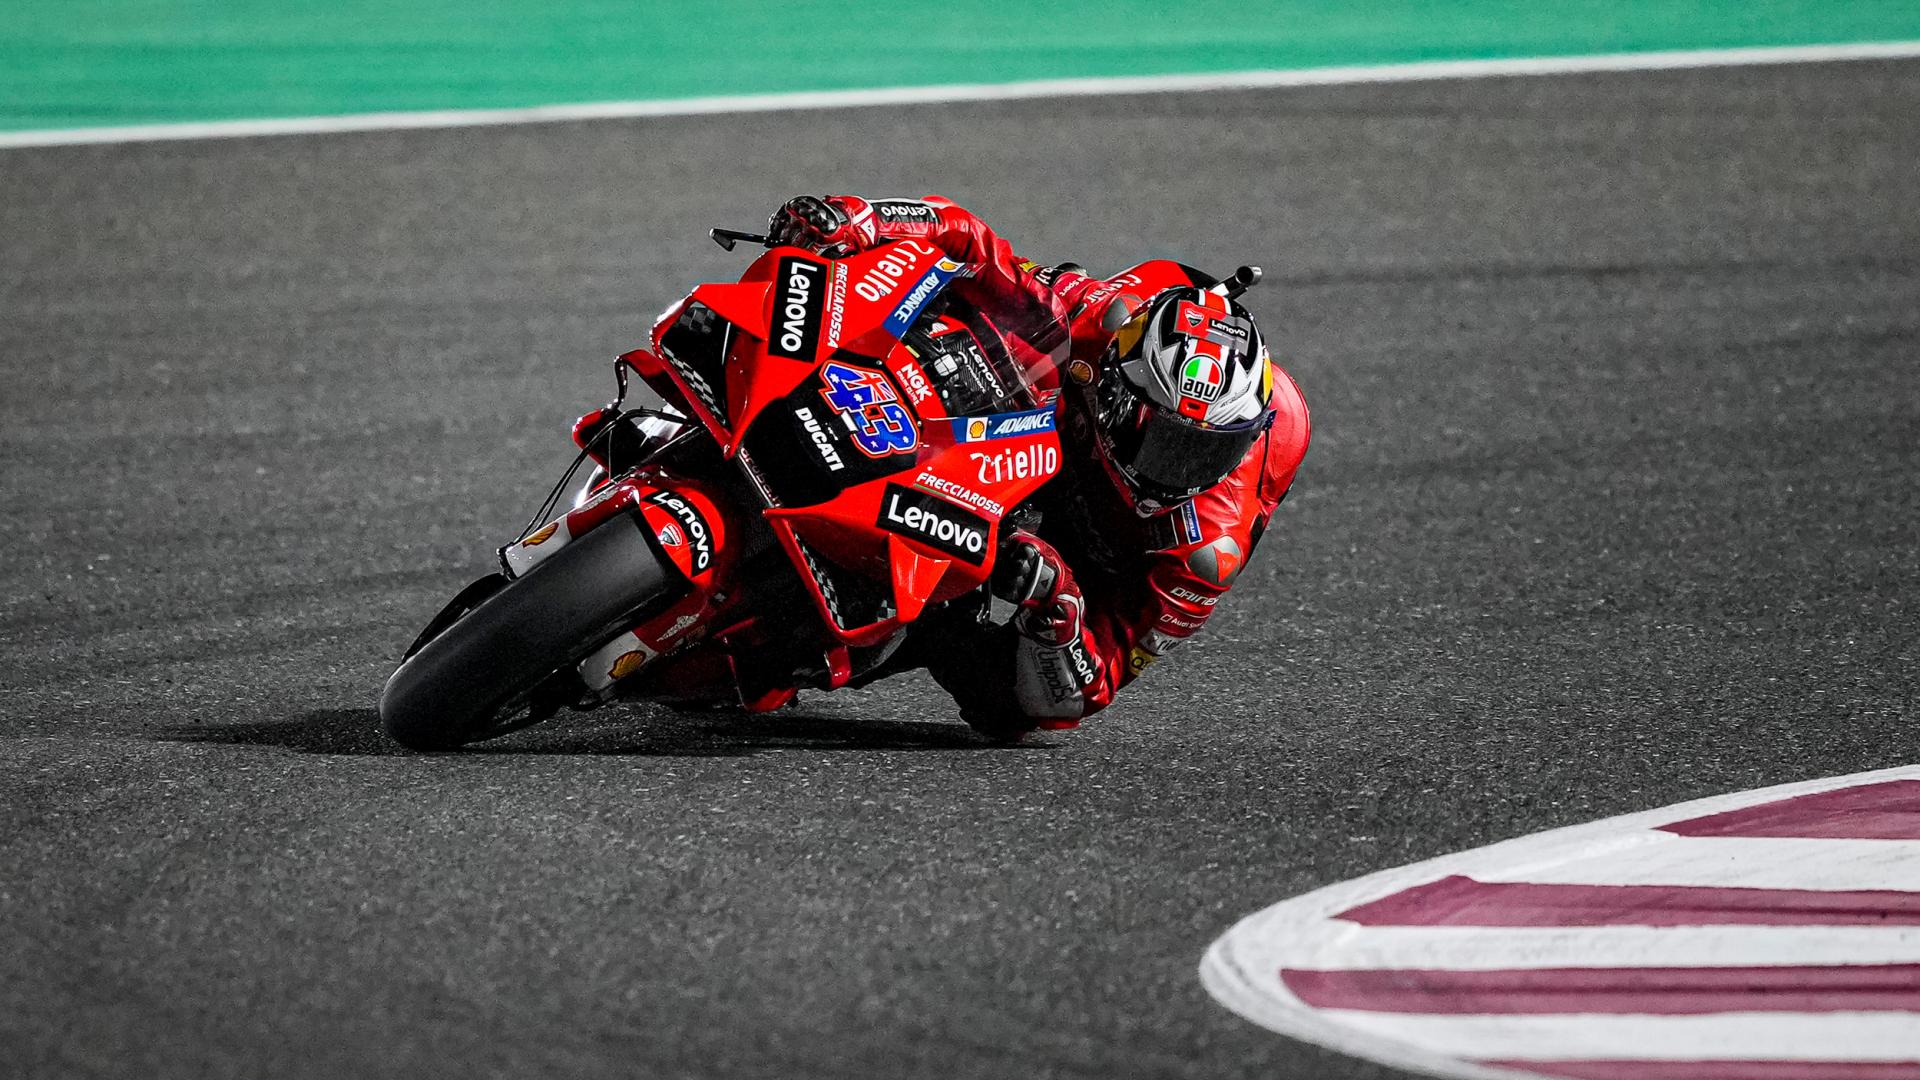 MotoGP Doha 2021 live stream: How to watch the Grand Prix online from